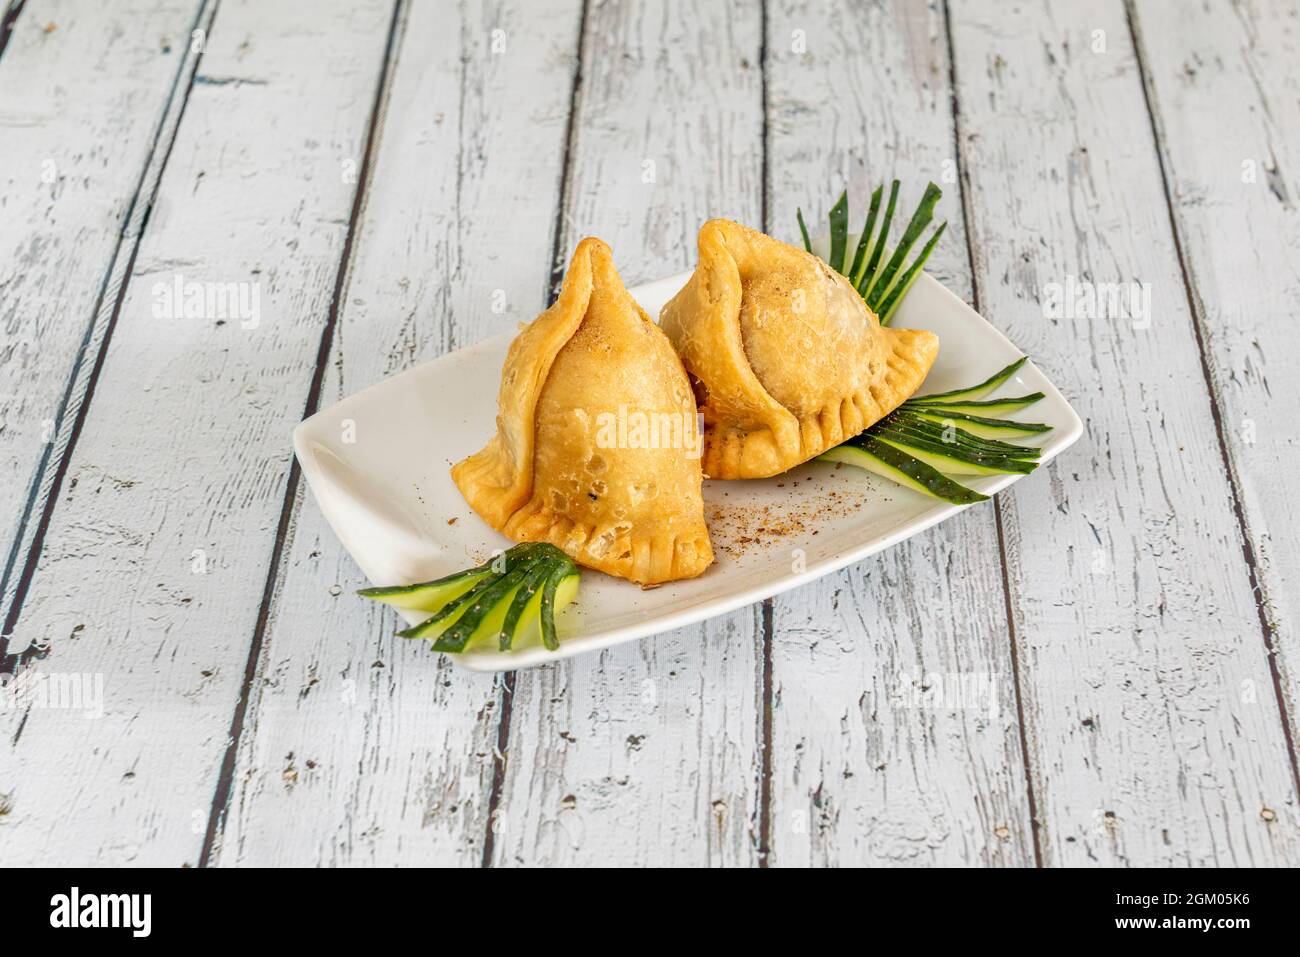 Portion of samosas stuffed with vegetables served in a pakistani restaurant in europe on a white table Stock Photo